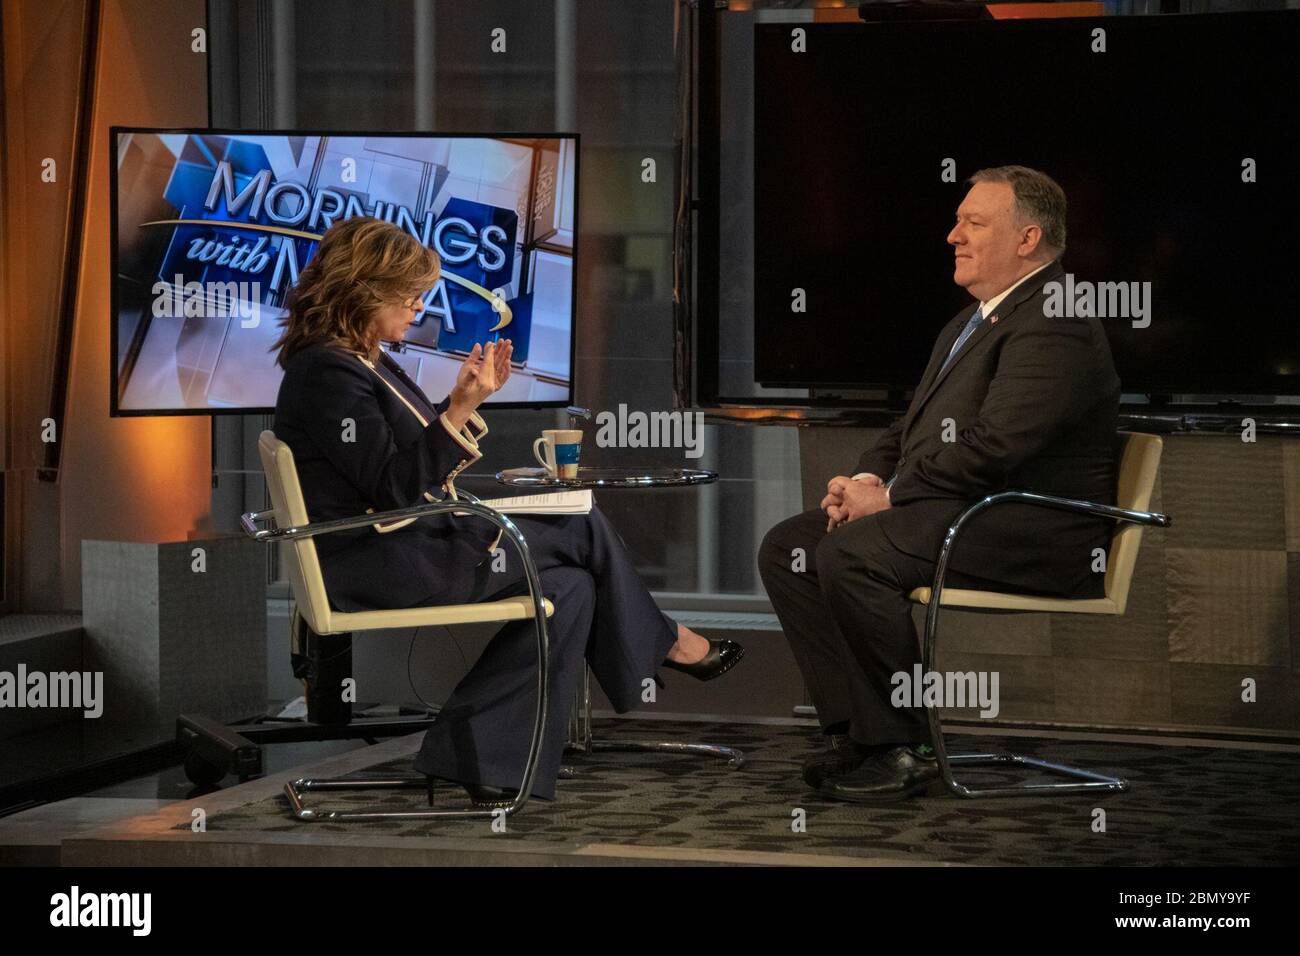 Secretary Pompeo Participates in an Interview on Fox Business U.S. Secretary of State Michael R. Pompeo participates in an interview with Maria Bartiromo on Fox Business in New York City, New York on February 21, 2019. Stock Photo